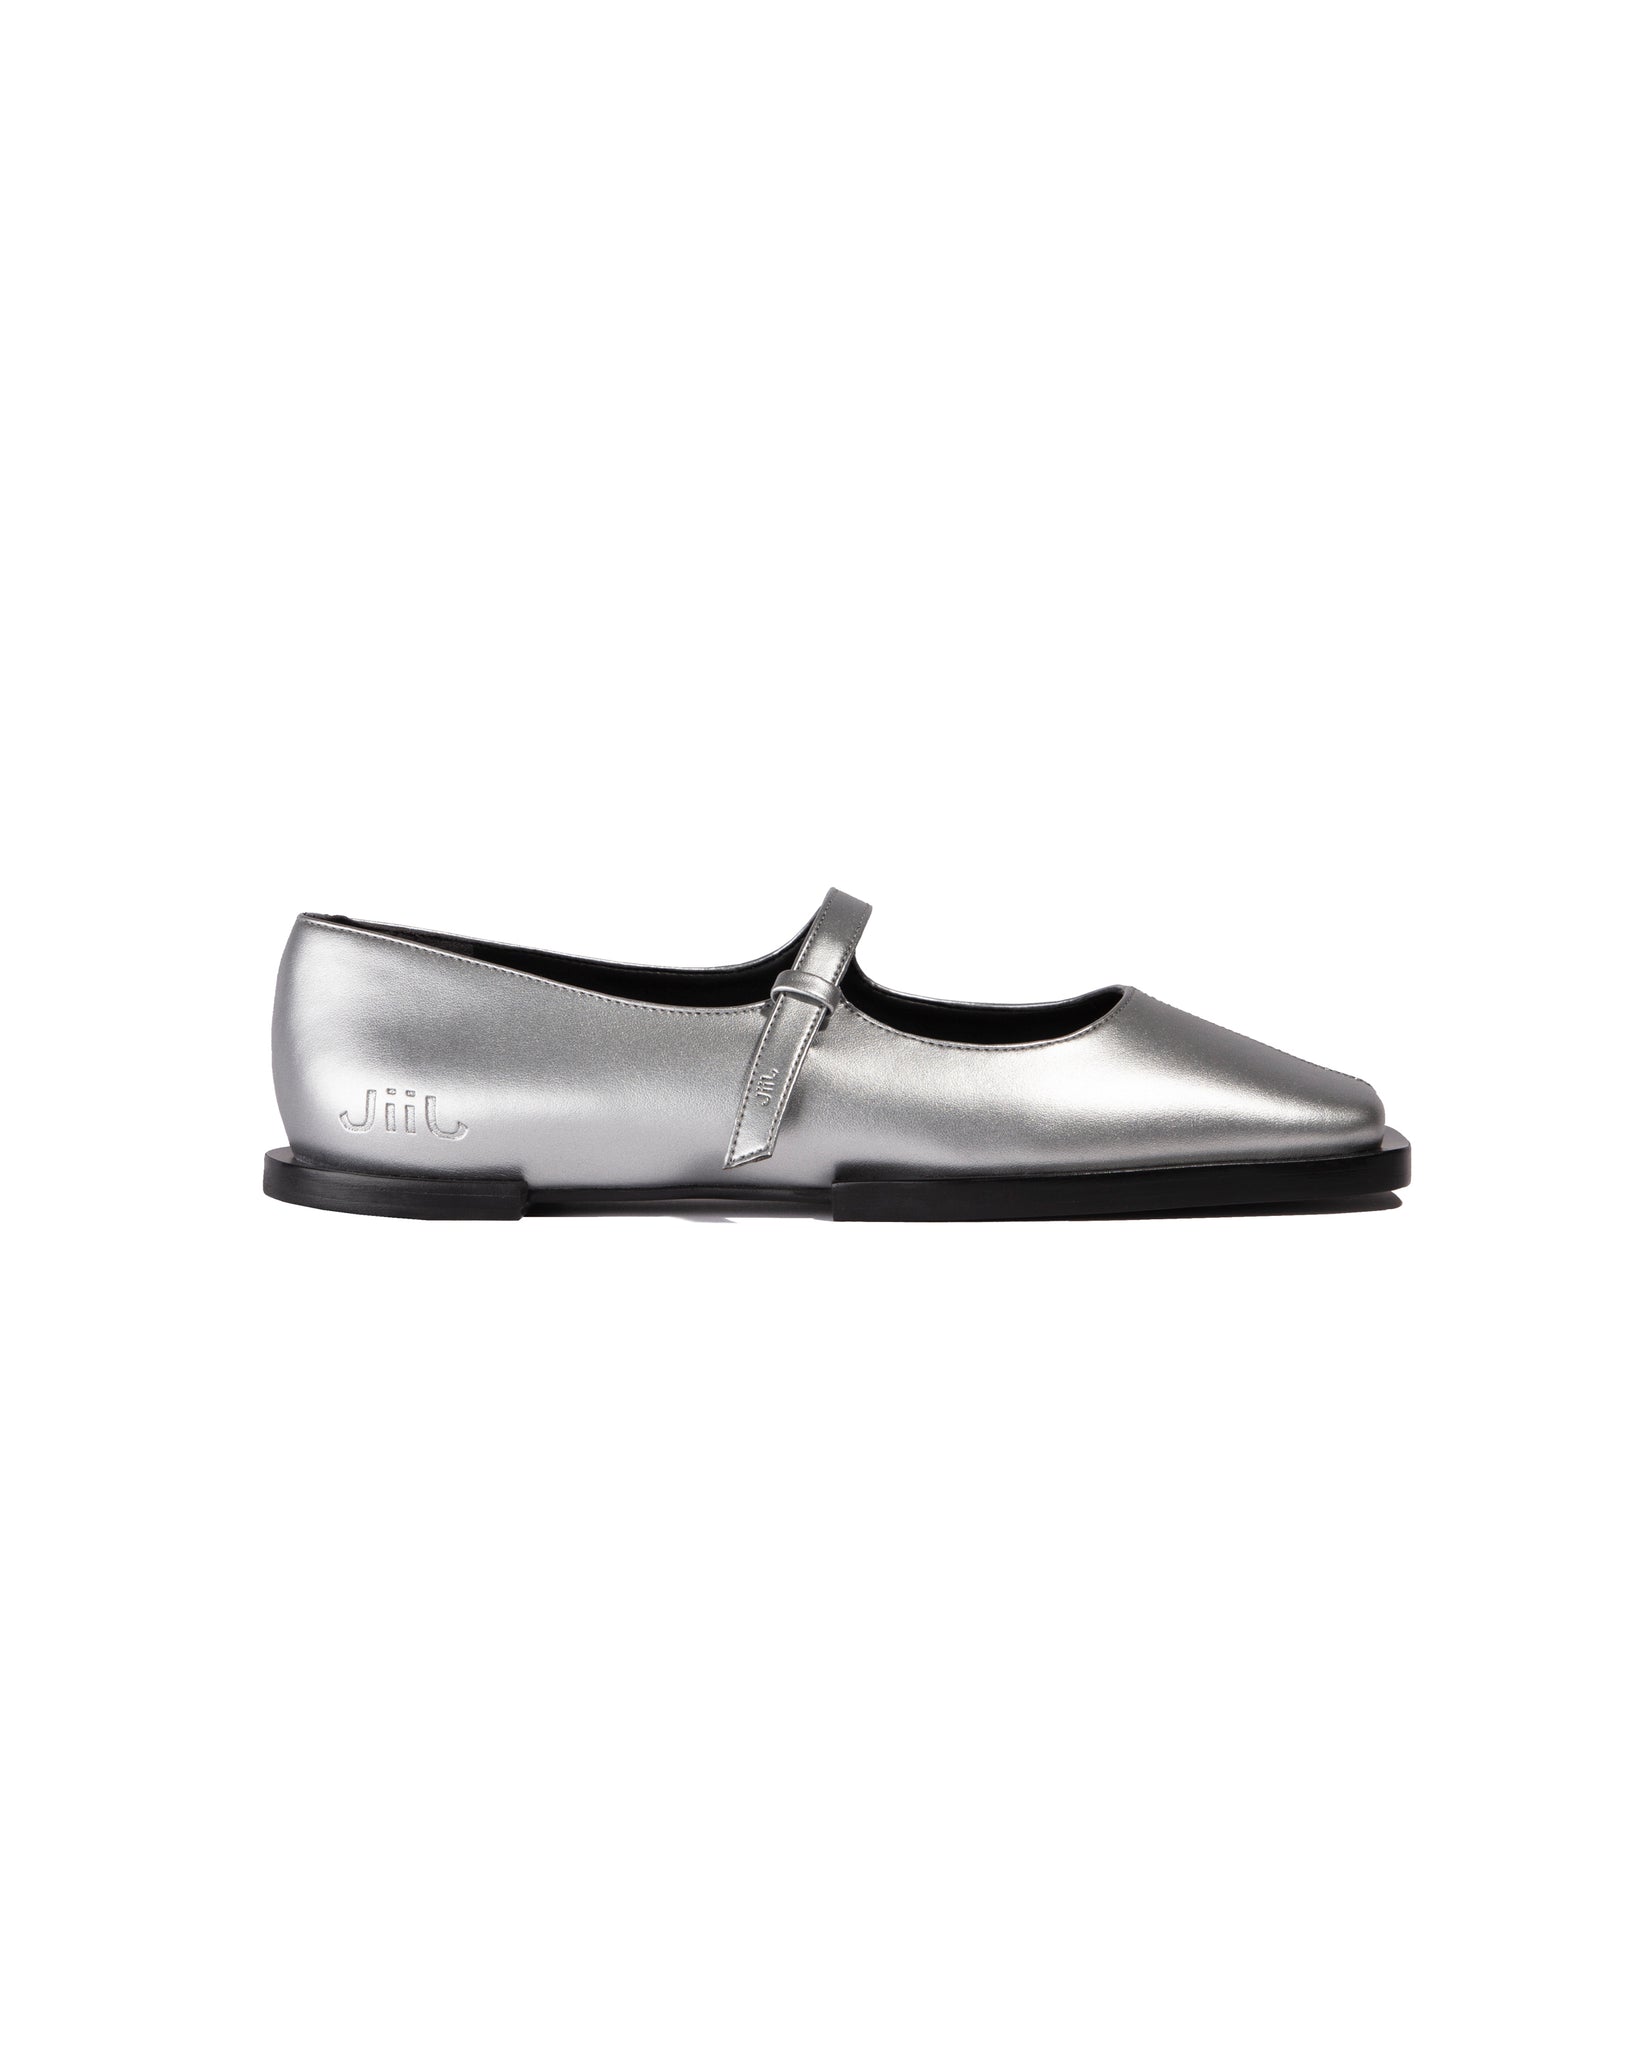 SILVER APPLE MARY JANES